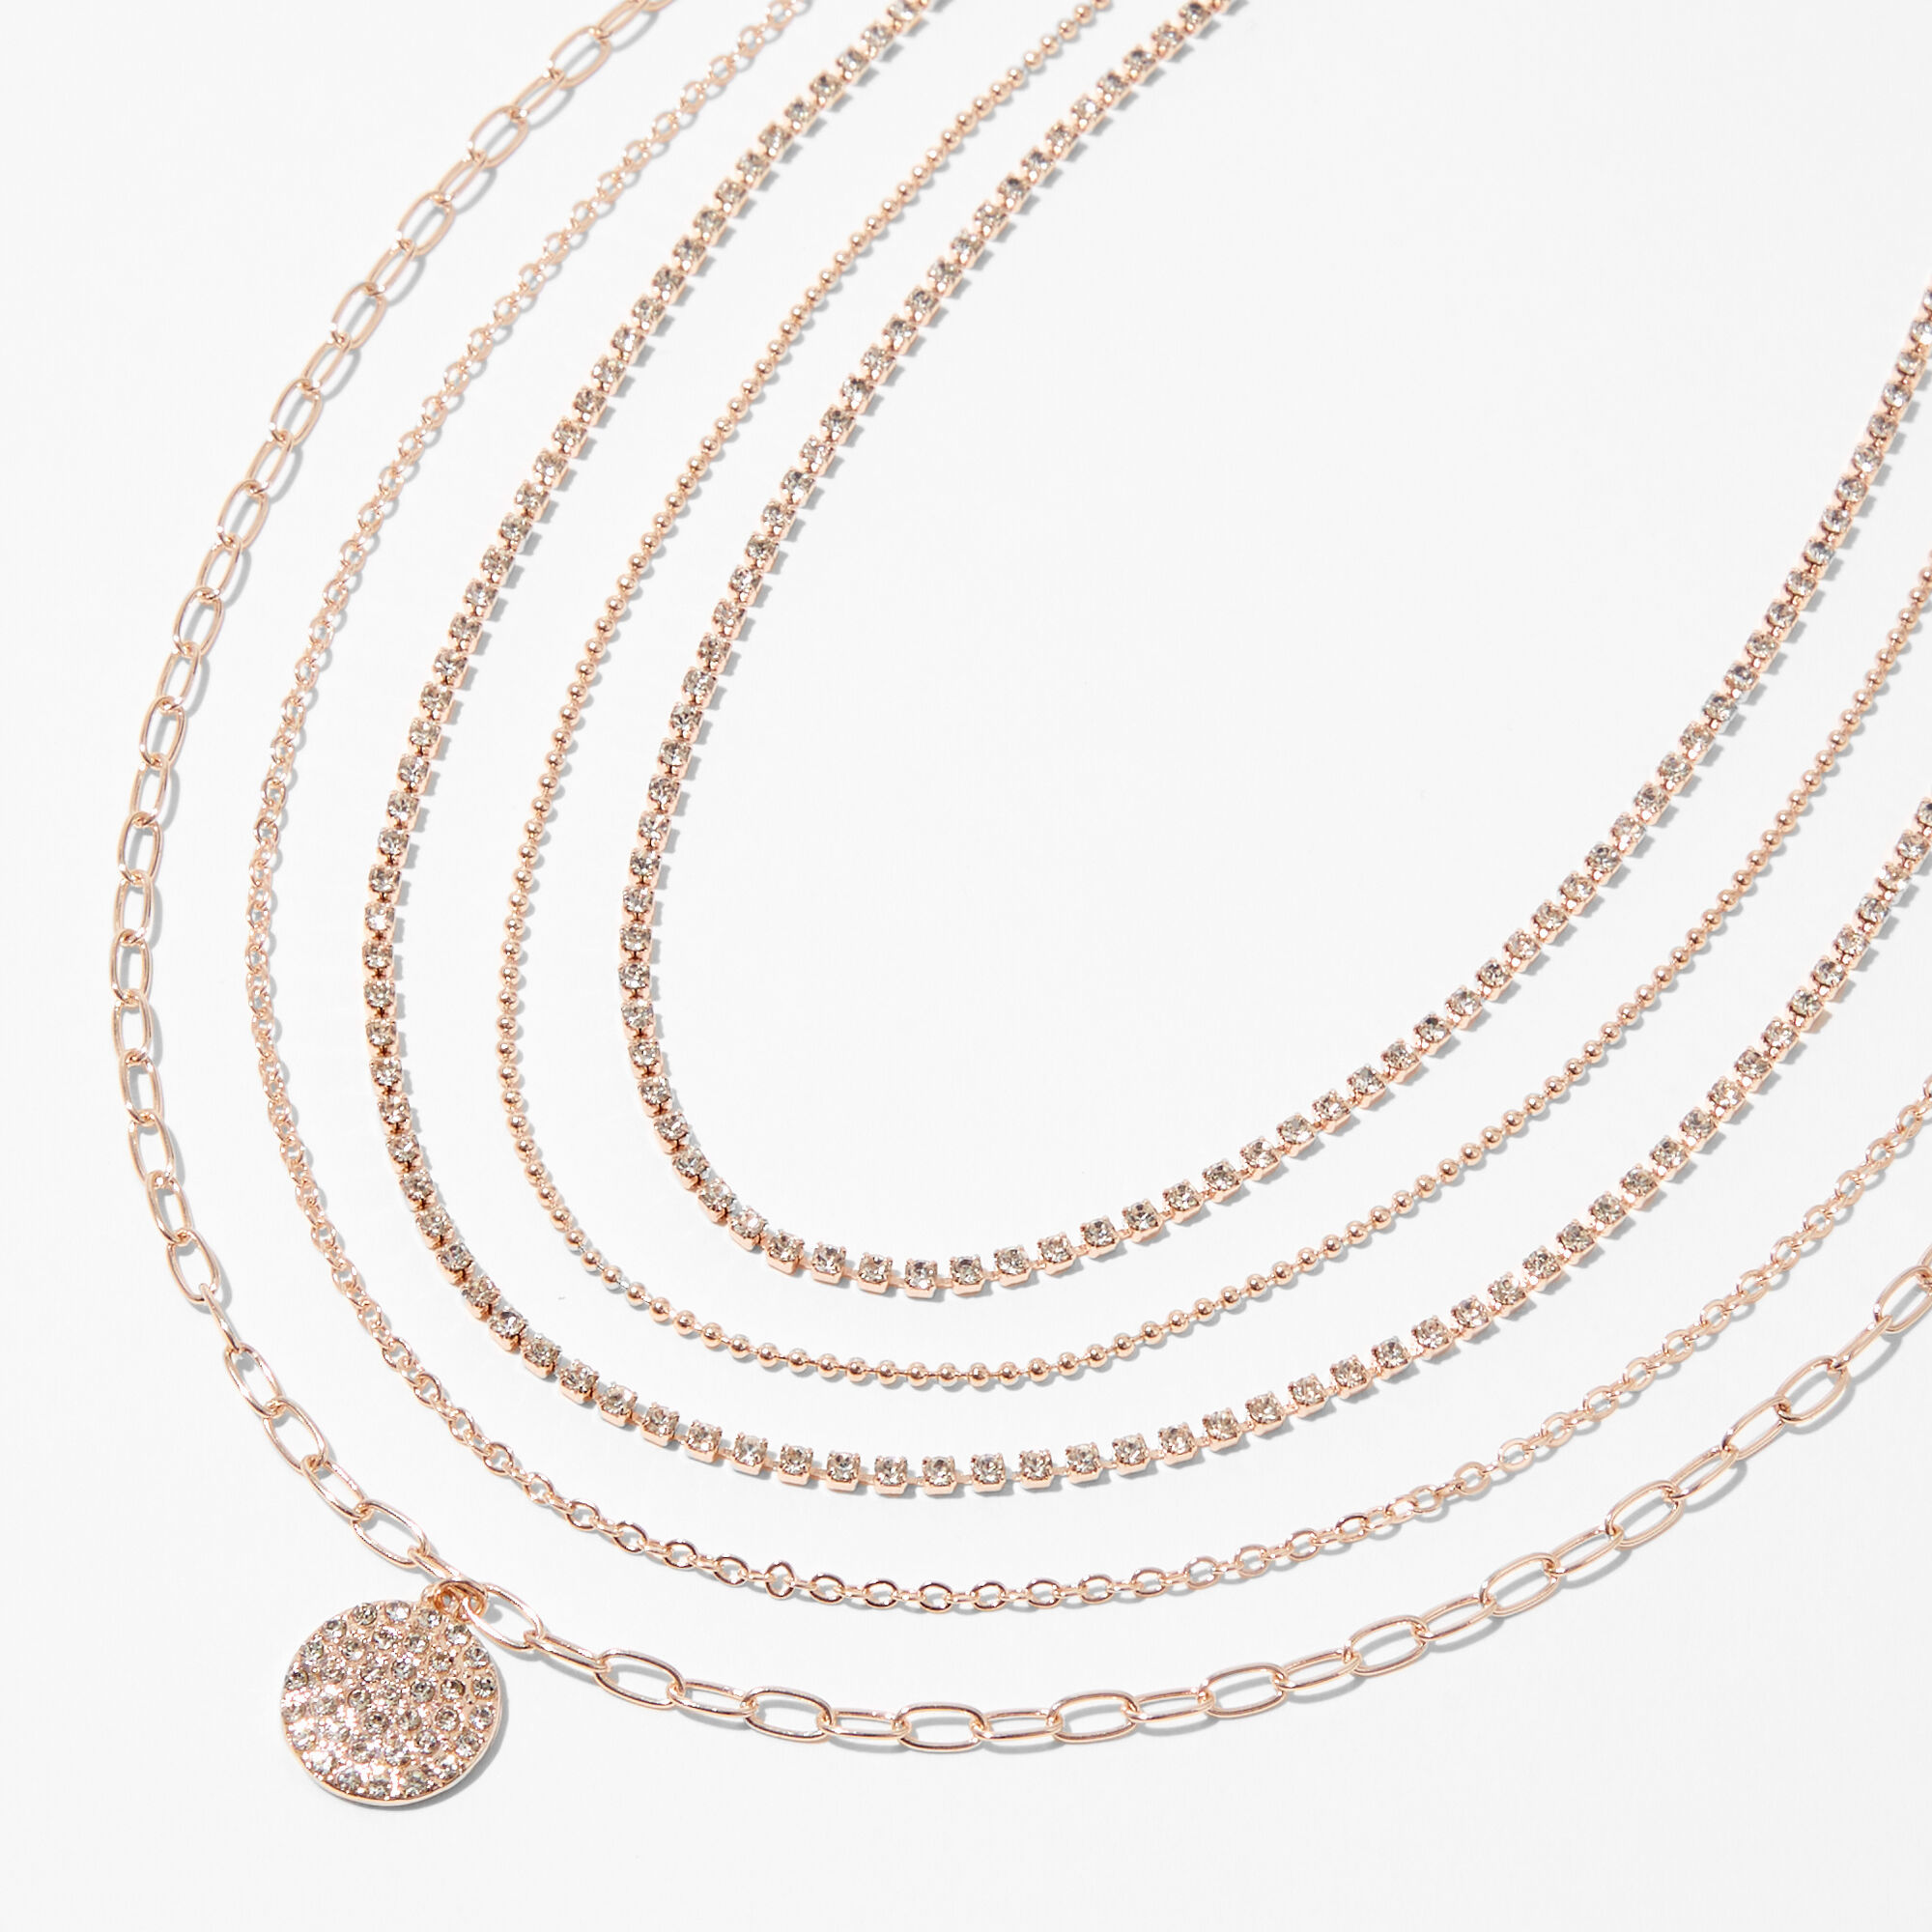 View Claires Tone Rhinestone Medallion Necklaces 5 Pack Rose Gold information